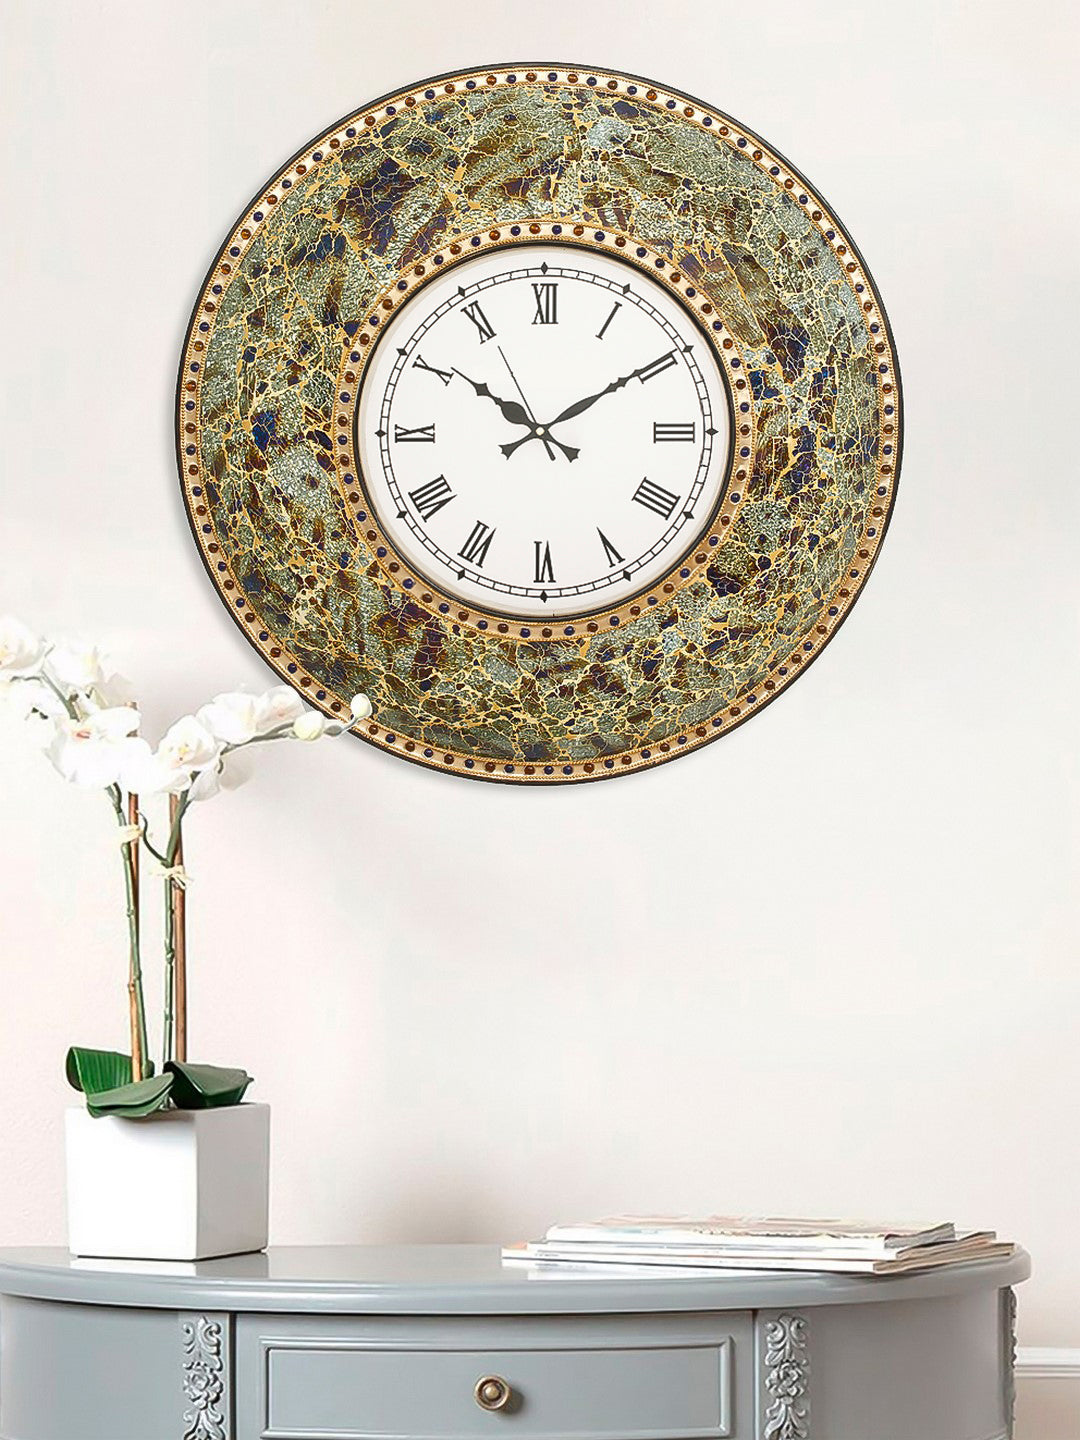 Multicolor Mosaic Glass & Wood Round Handcrafted Analog Ethnic Luxury Roman Numeral Wall Clock 2